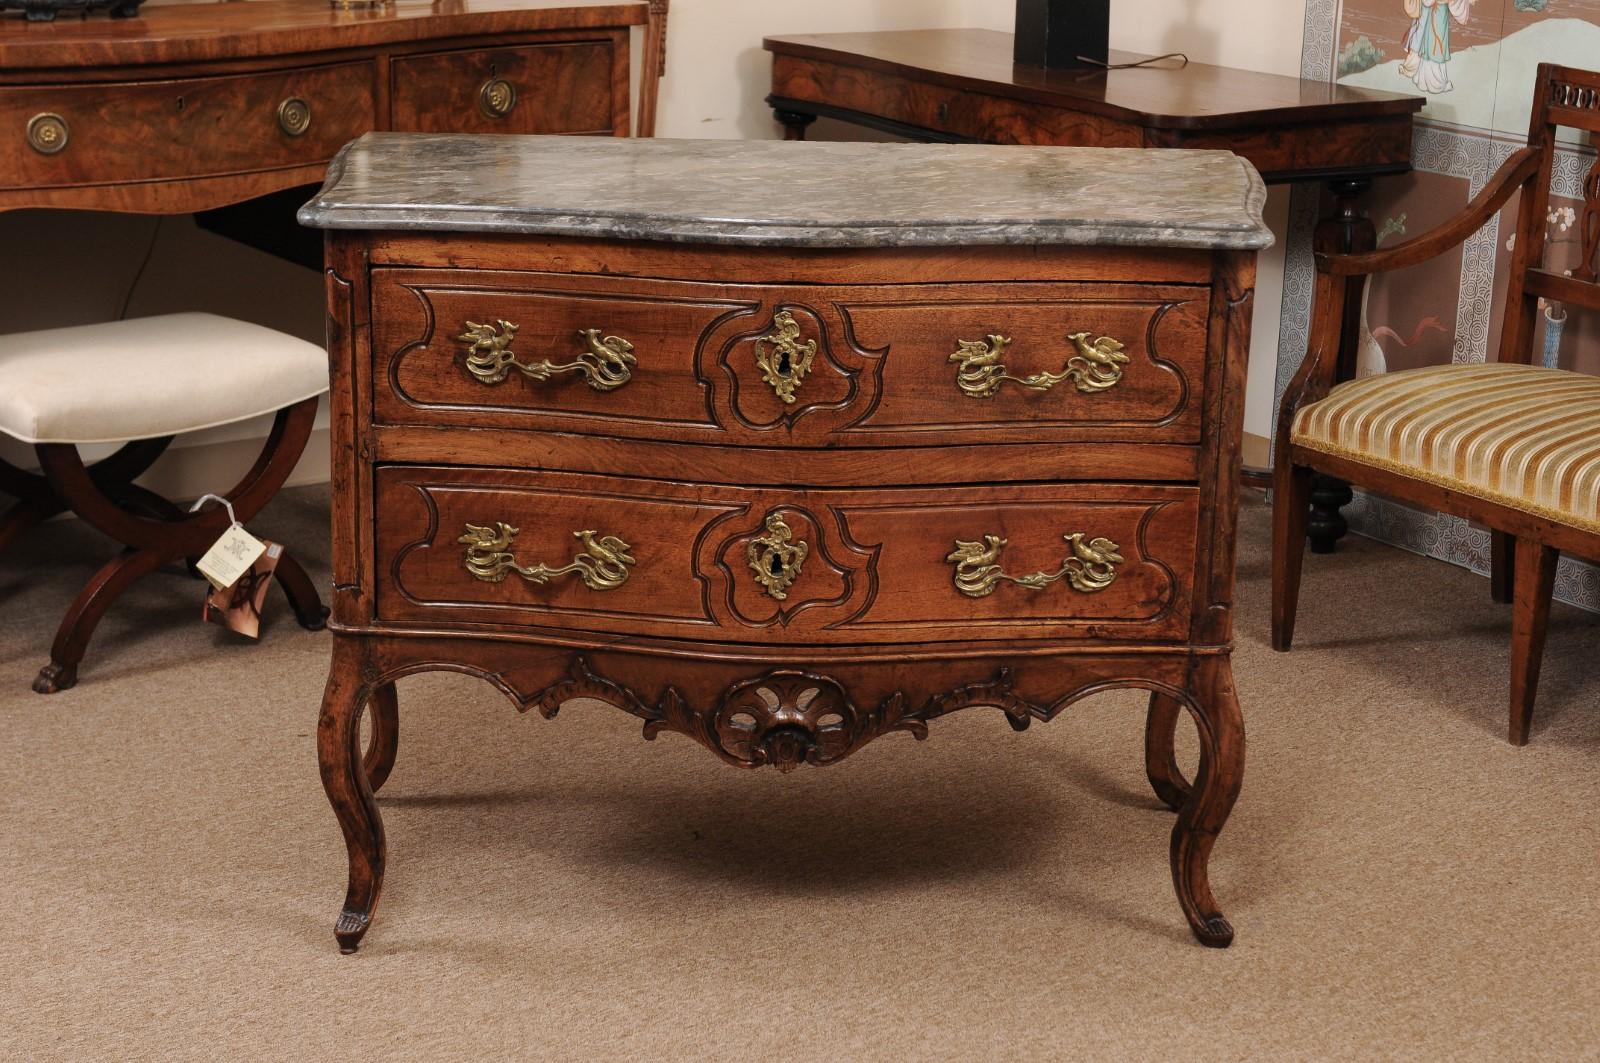 18th century French Louis XV walnut commode with grey marble top, pierced apron, & 2 drawers.